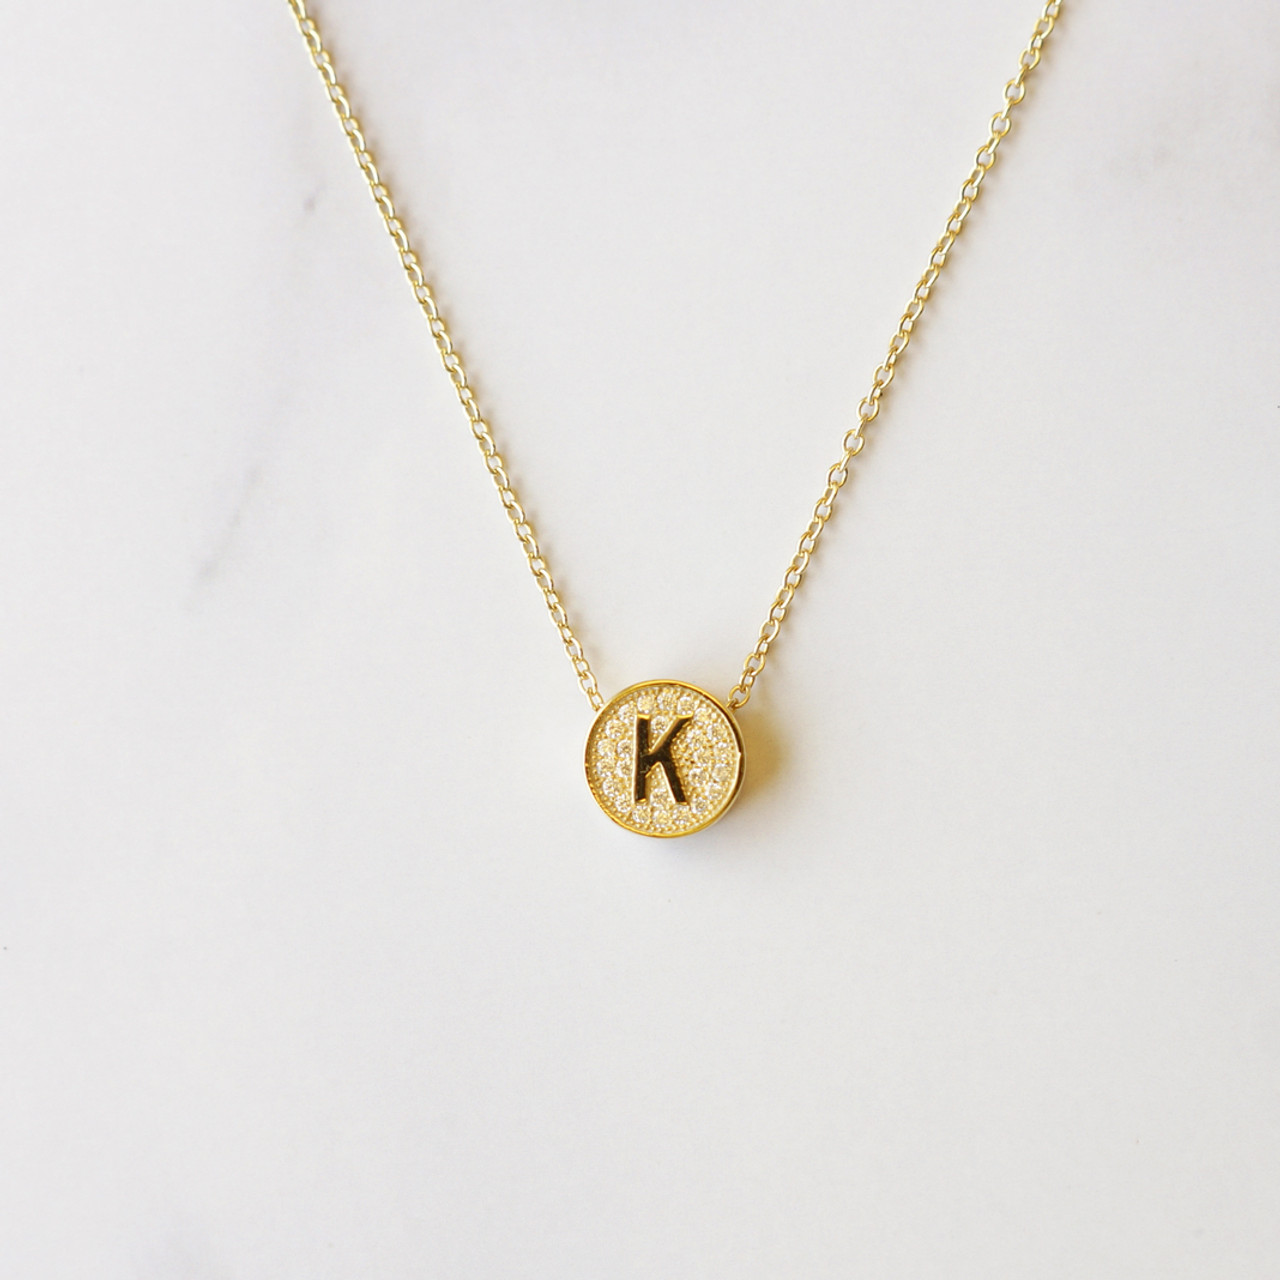 Latest Hot Selling Stainless Steel Jewelry Locket Necklace Letter K and CZ  Stone Filled, Hln1063 - China Pendant Necklace and Fashion Jewelry price |  Made-in-China.com